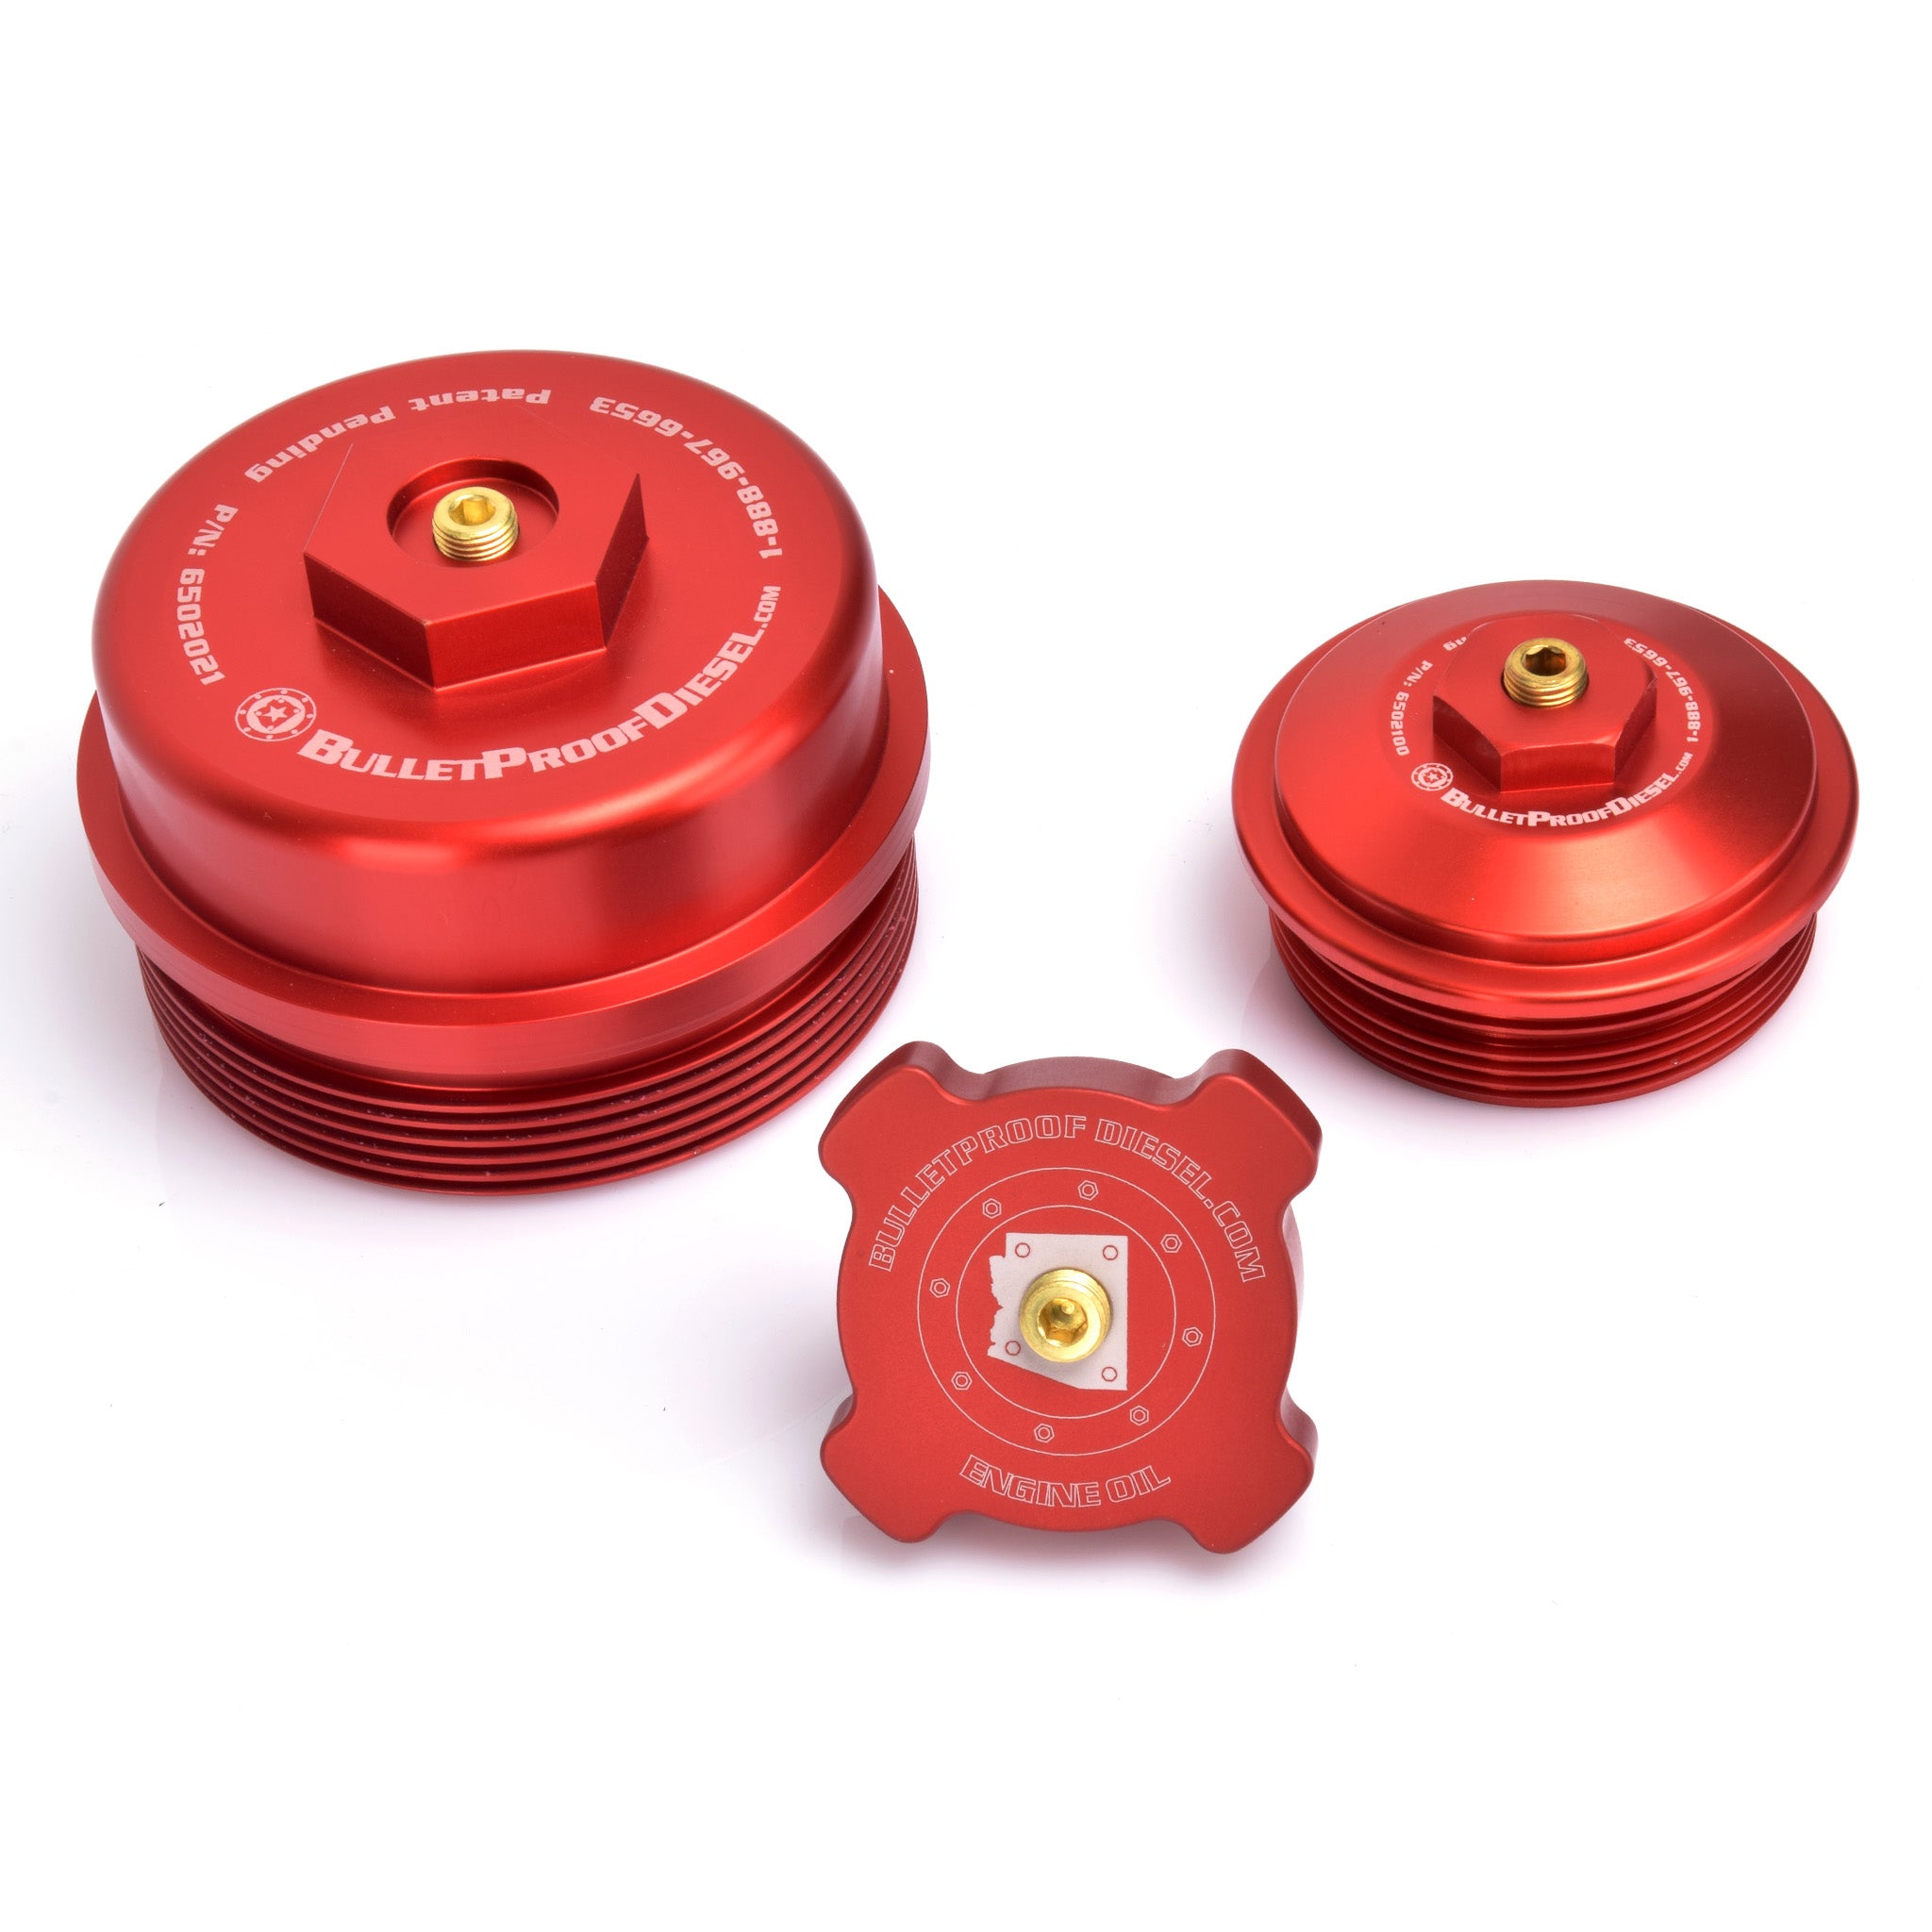 Upgraded Direct Fit Red Anodized Billet Aluminum Oil Filter, Oil Fill, and Lower Fuel Rail Cap Caps Set for the Ford Power Stroke 6.0L Diesel with 1/8” MPT Threaded Port. Fits Years 2003 2004 2005 2006 2007.